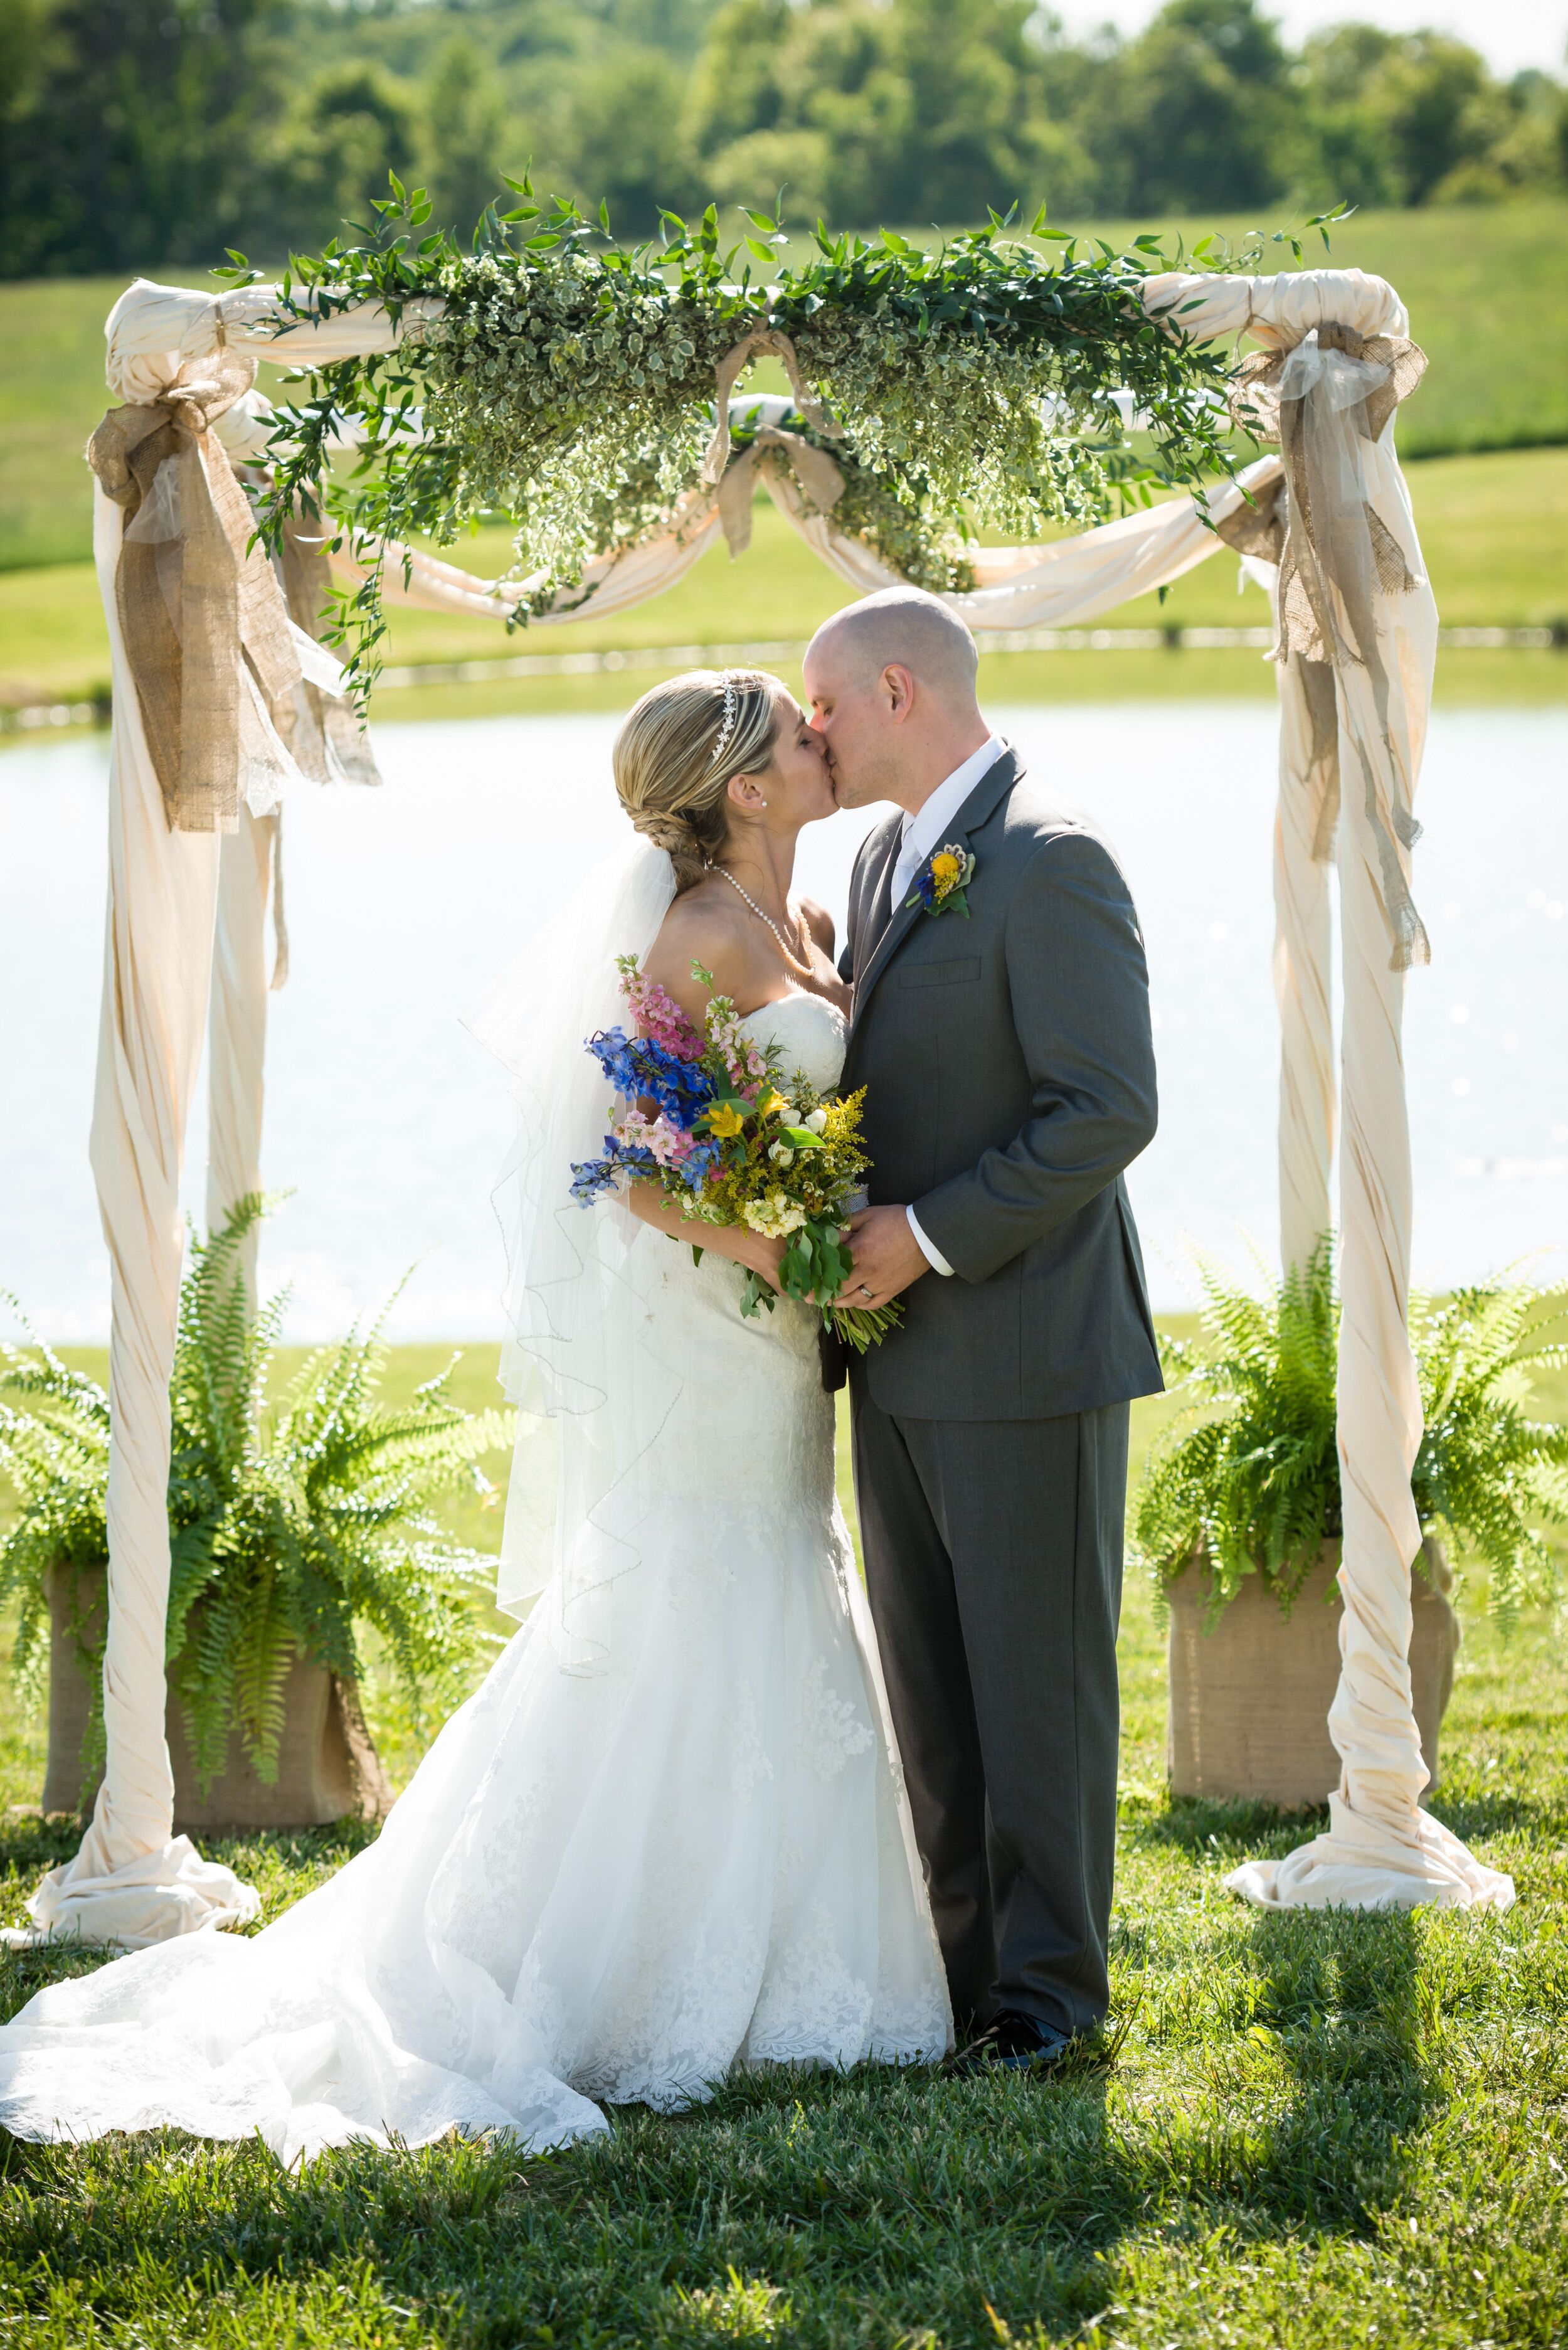 Rustic, Bohemian Ceremony with Square Wedding Arch